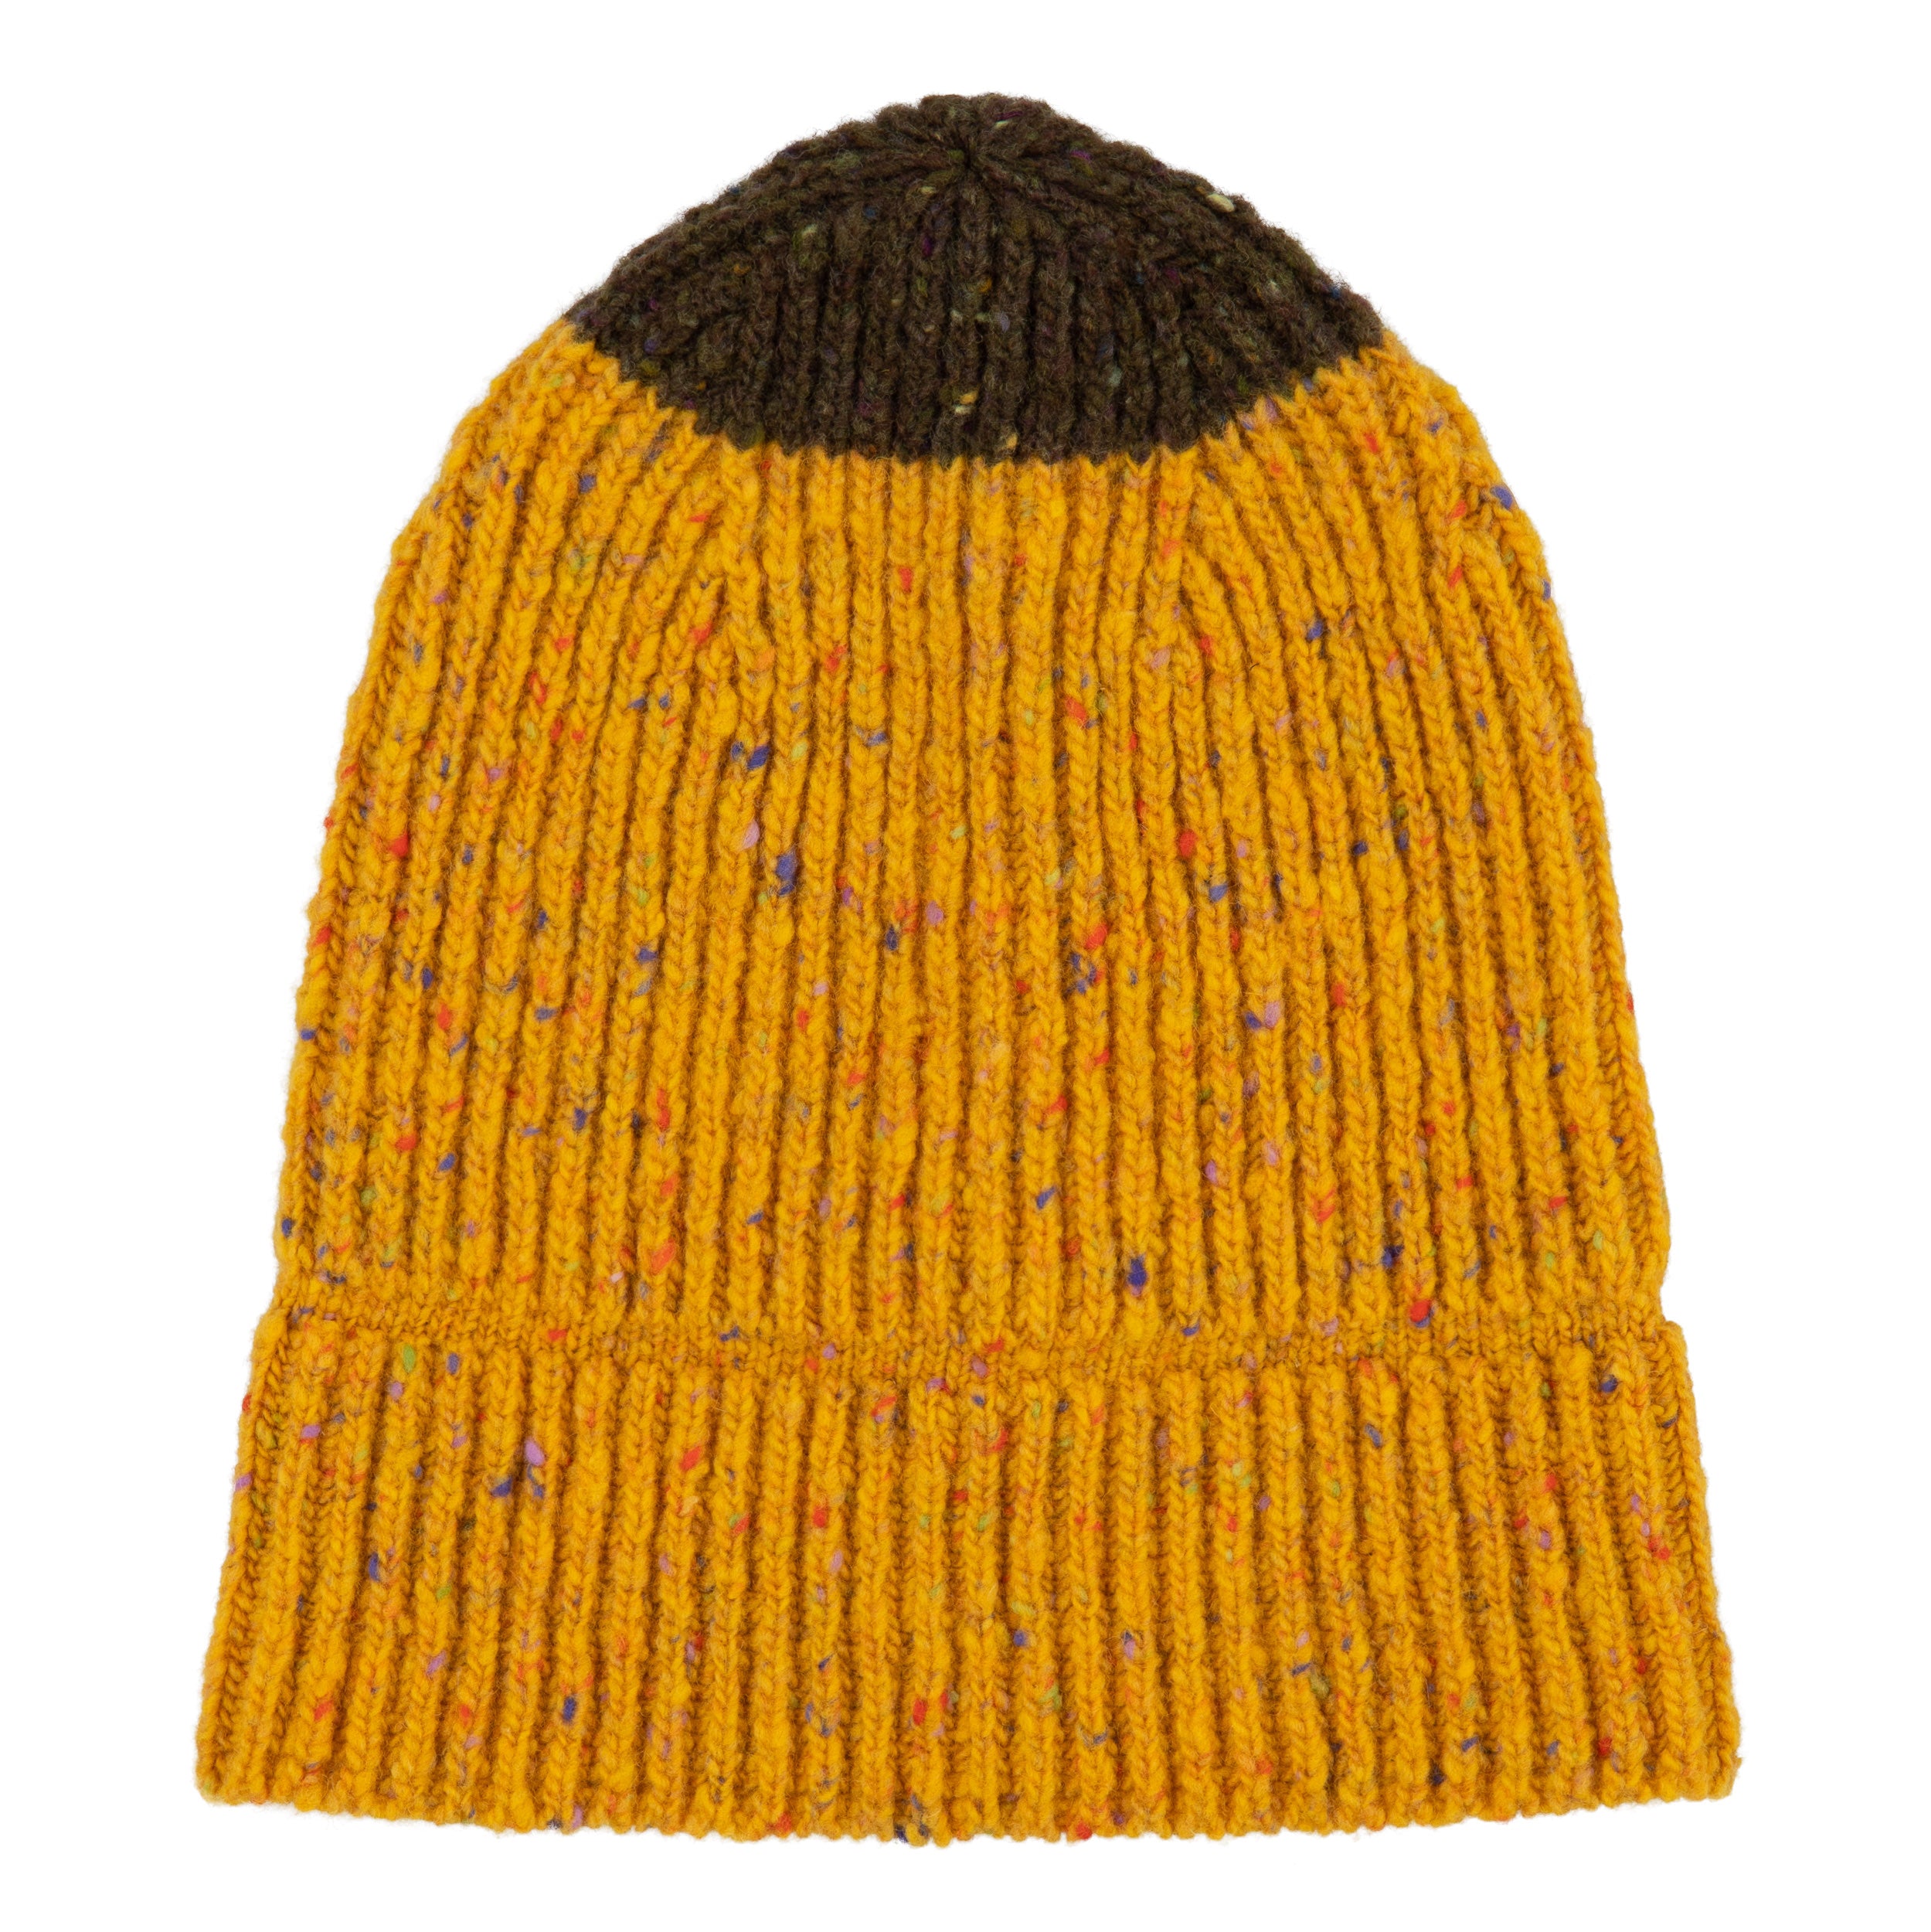 Carrier Company Two-Tone Donegal hat in Marigold and Umber